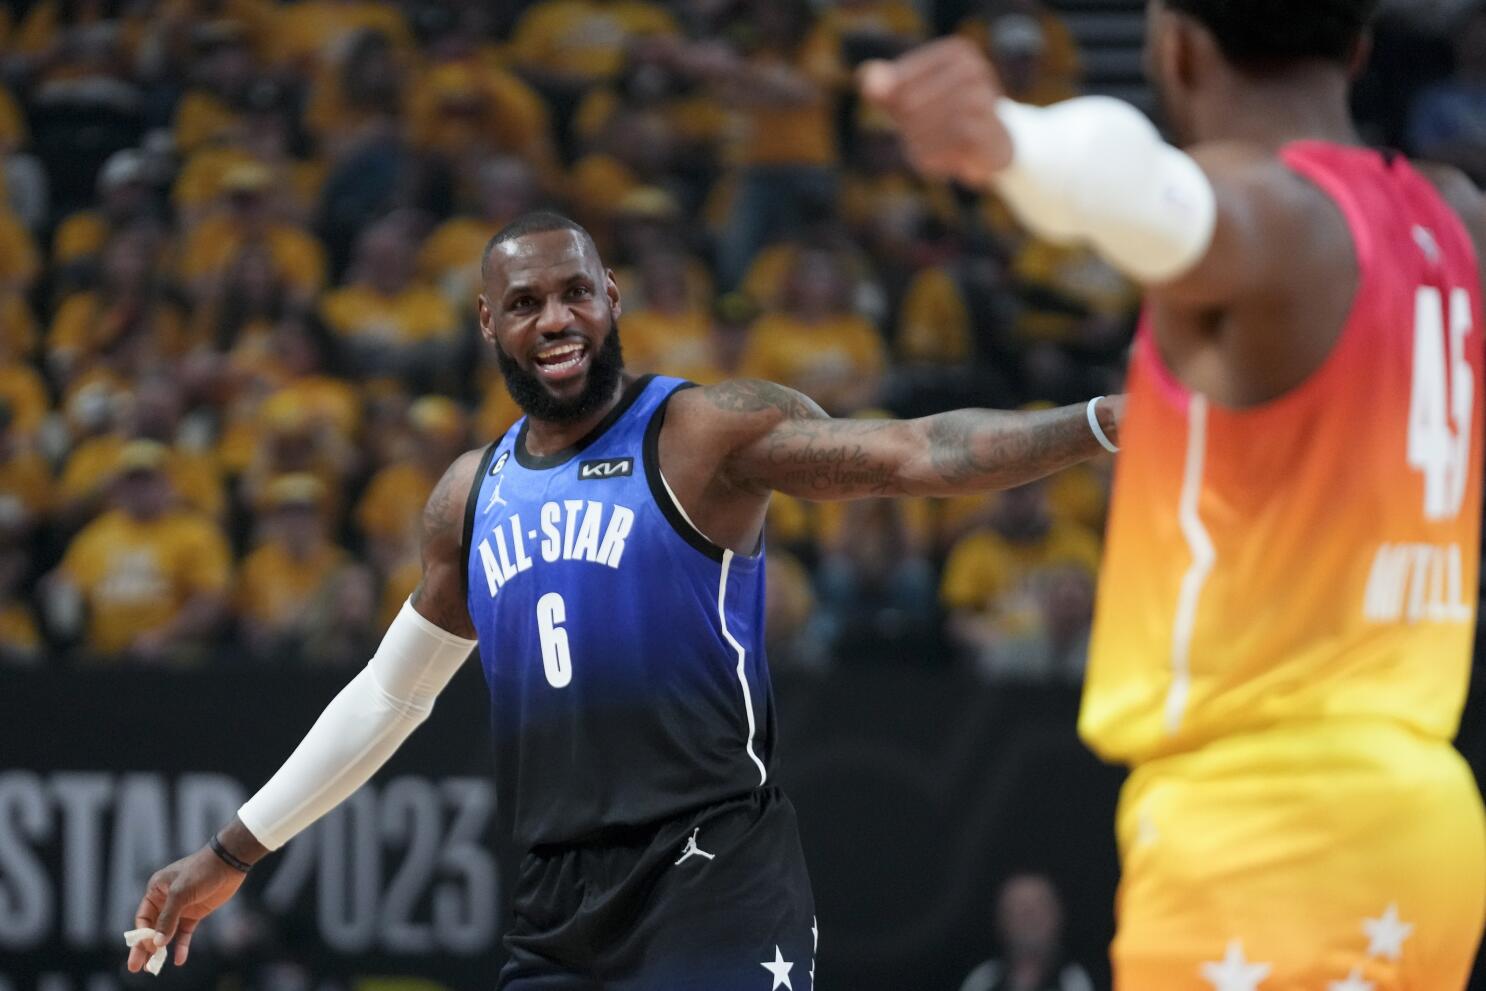 NBA All-Star Game 2019 - Draft your own team as LeBron or Giannis